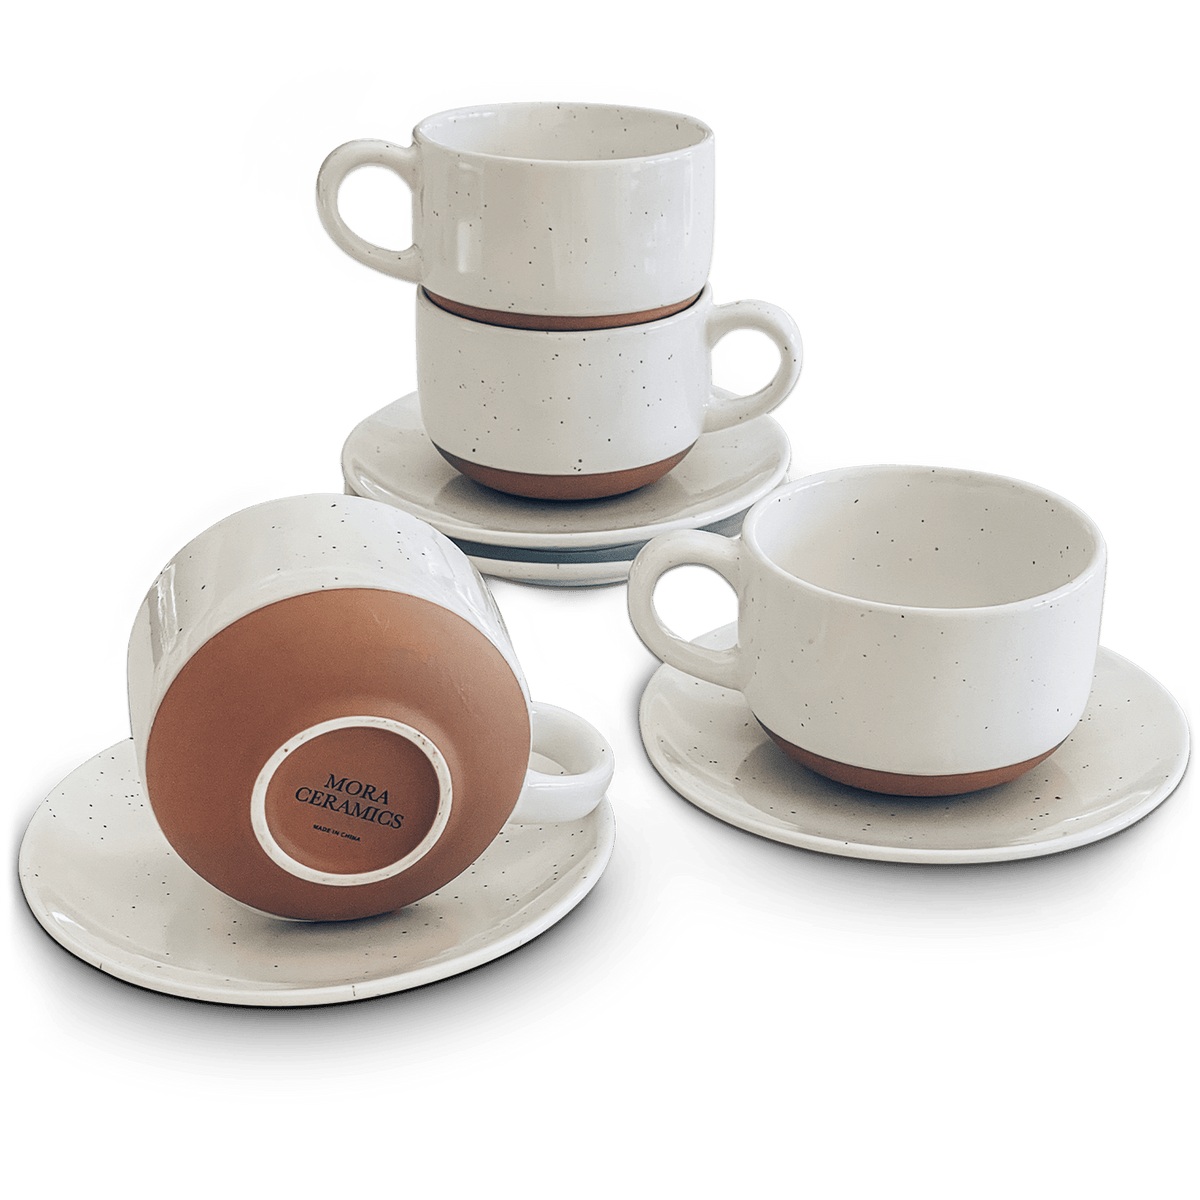 Cappuccino Cup & Saucer x 4 12oz, White, Dine